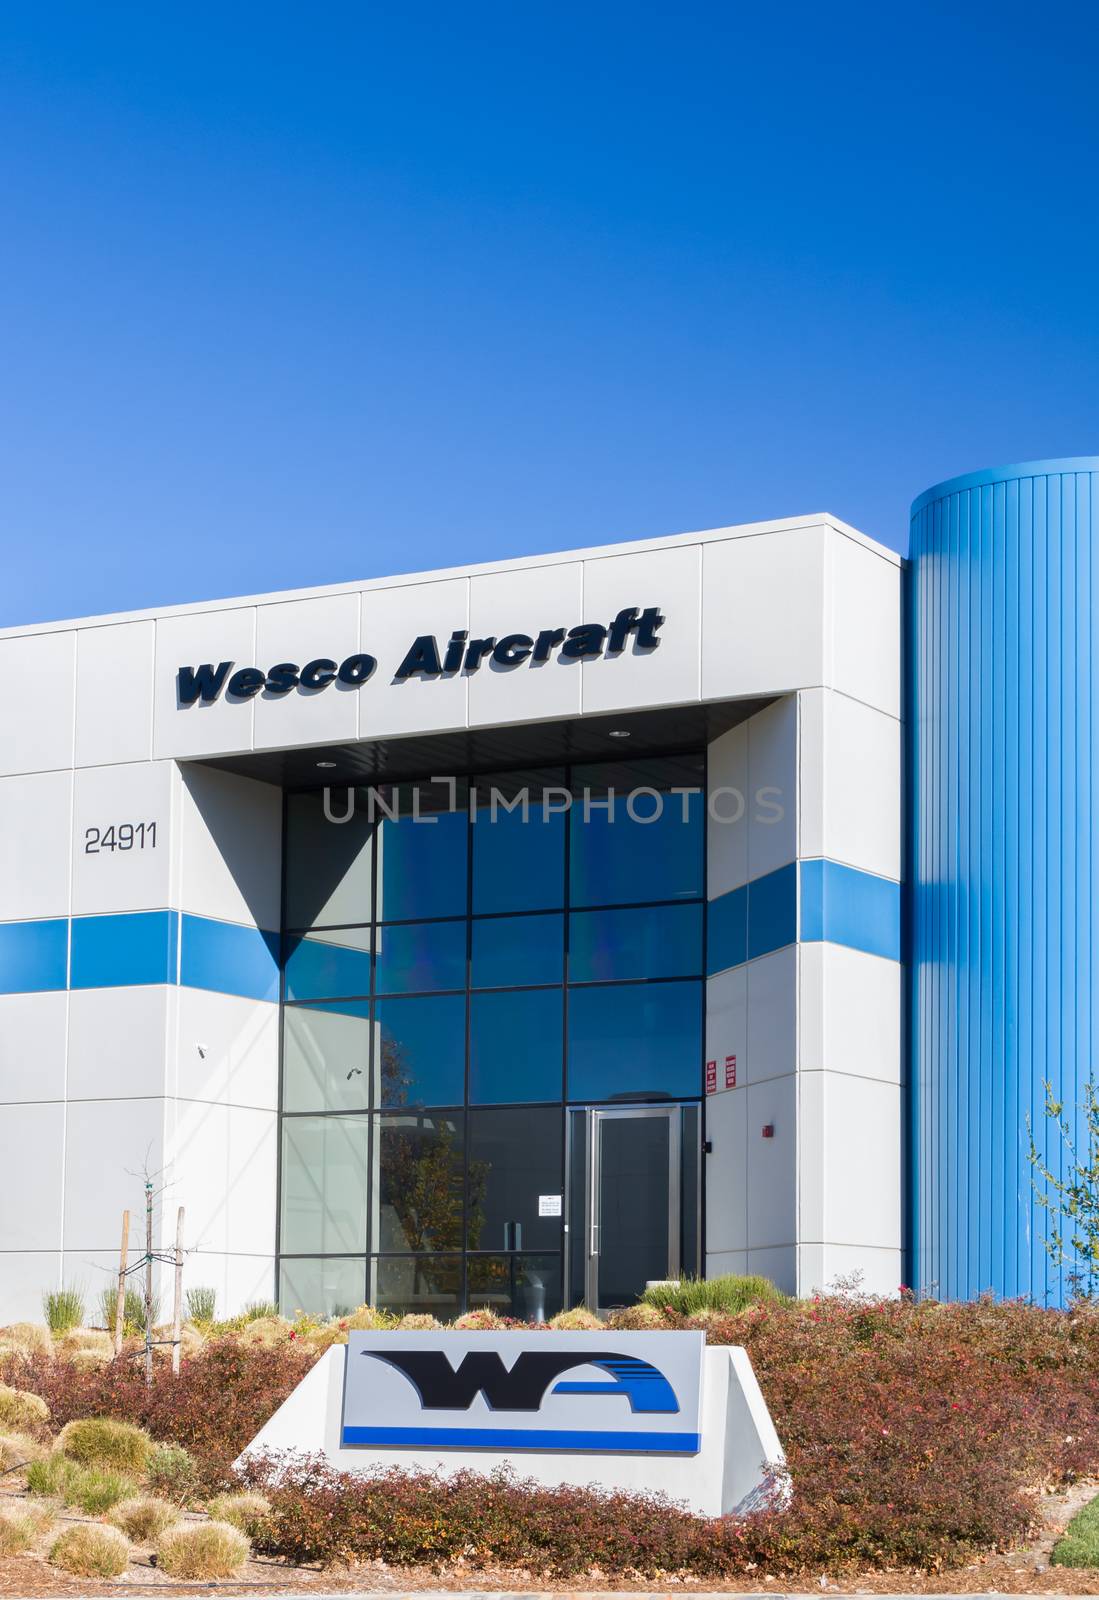 VALENCIA CA/USA - DECEMBER 26, 2015: Wesco Aircraft corporate headquarters. Wesco Aircraft provides supply chain management services to the aerospace industry.